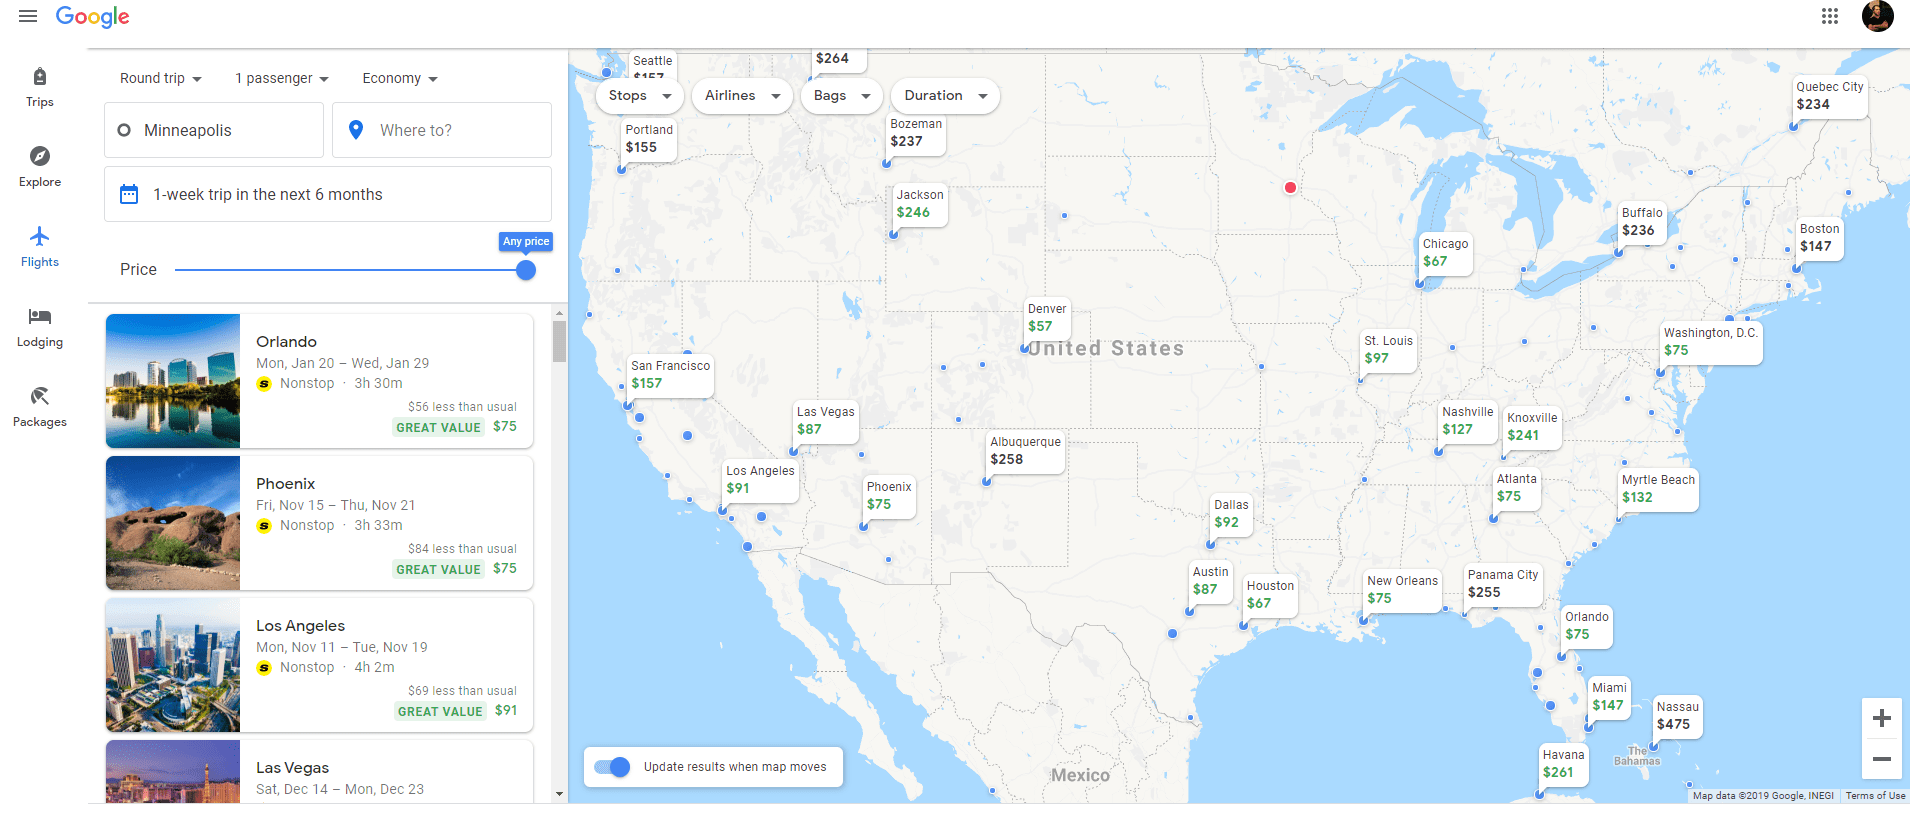 google flights explore map  How to Use Google Flights to Find Cheap Flights in 2022 &#8211; Thrifty Traveler google flights explore